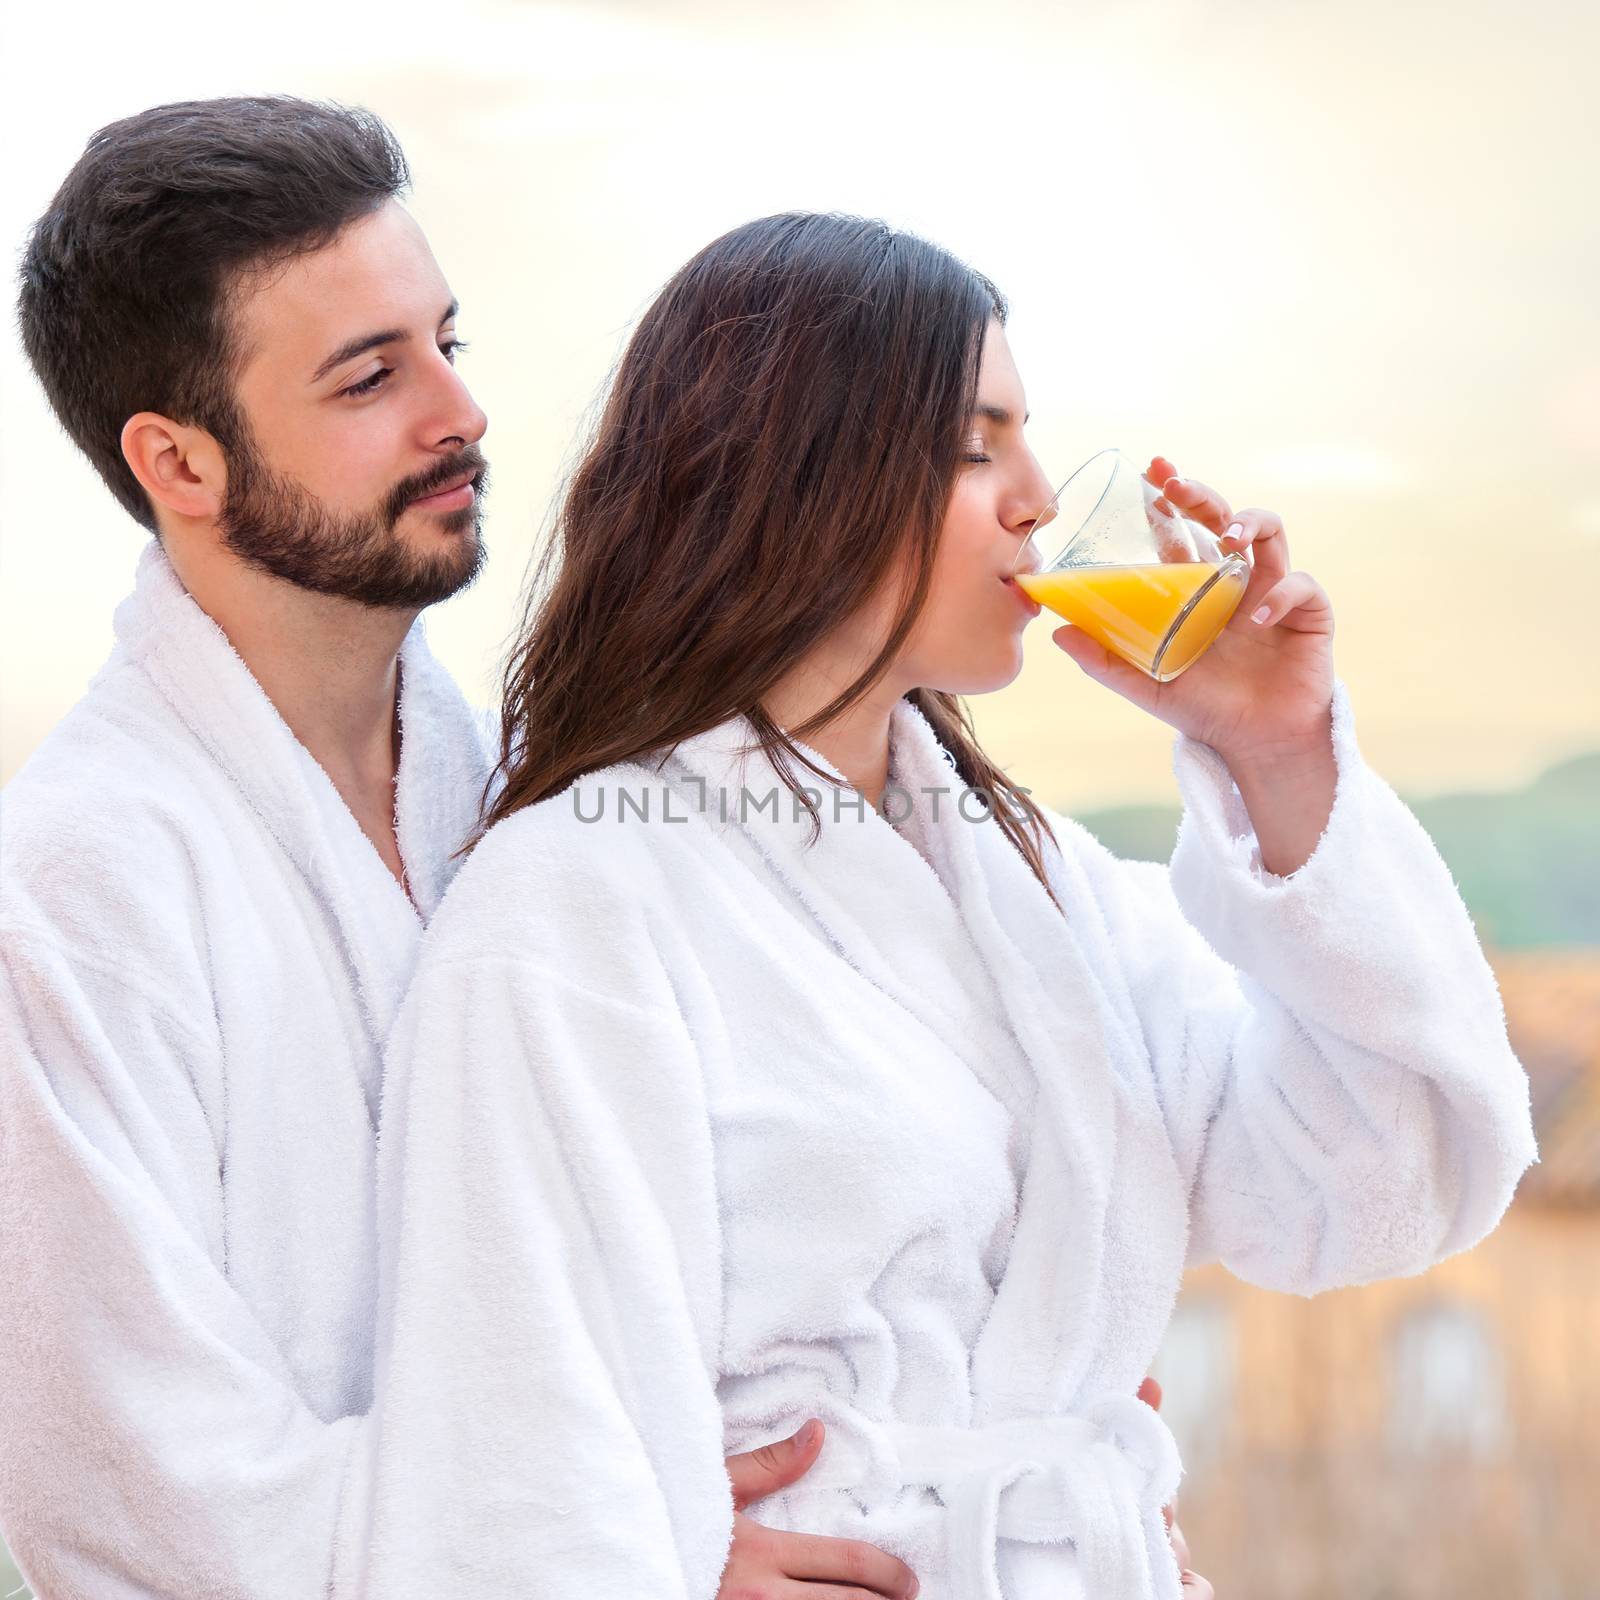 Close up of young couple in bathrobe. Woman drinking fruit juice.